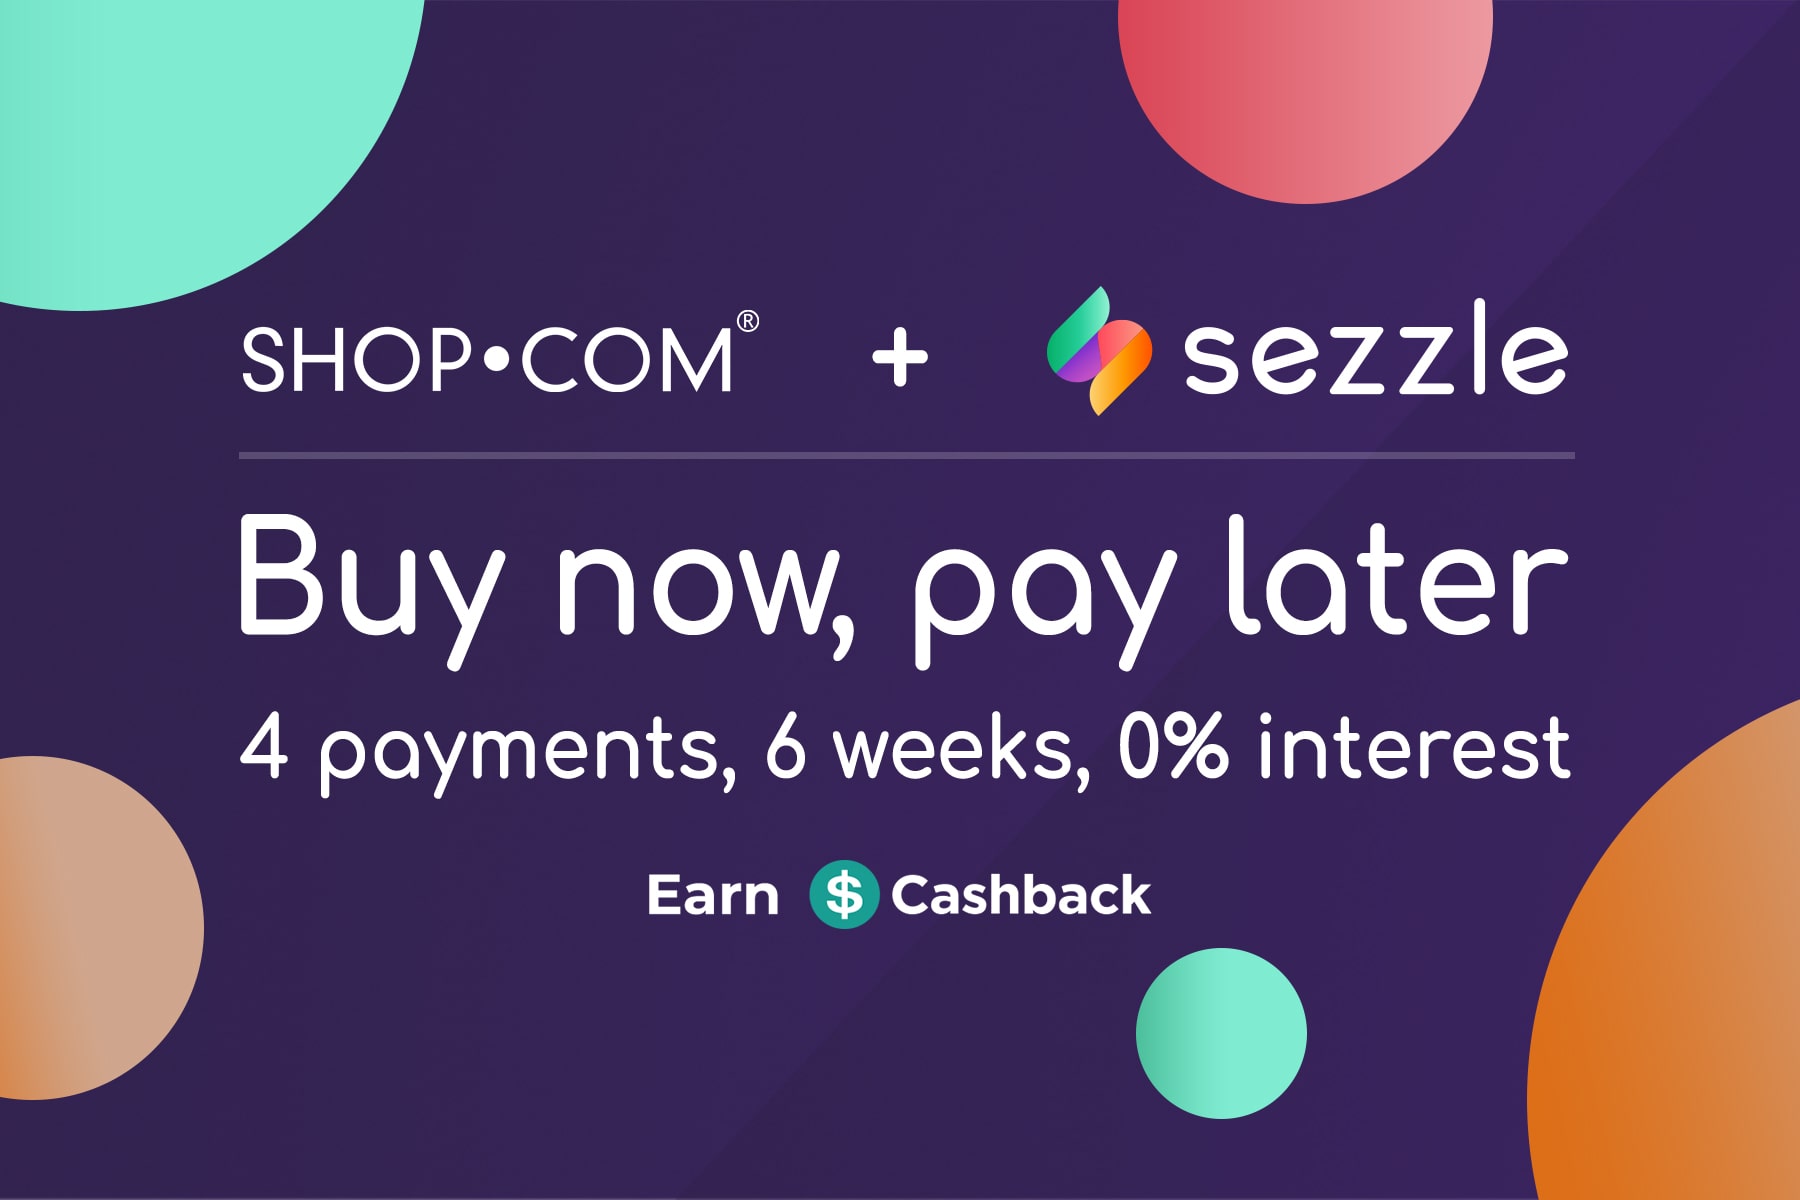 SHOP.COM + Sezzle, Buy now, pay later, 4 payments, 6 weeks, 0% interest, Earn Cashback